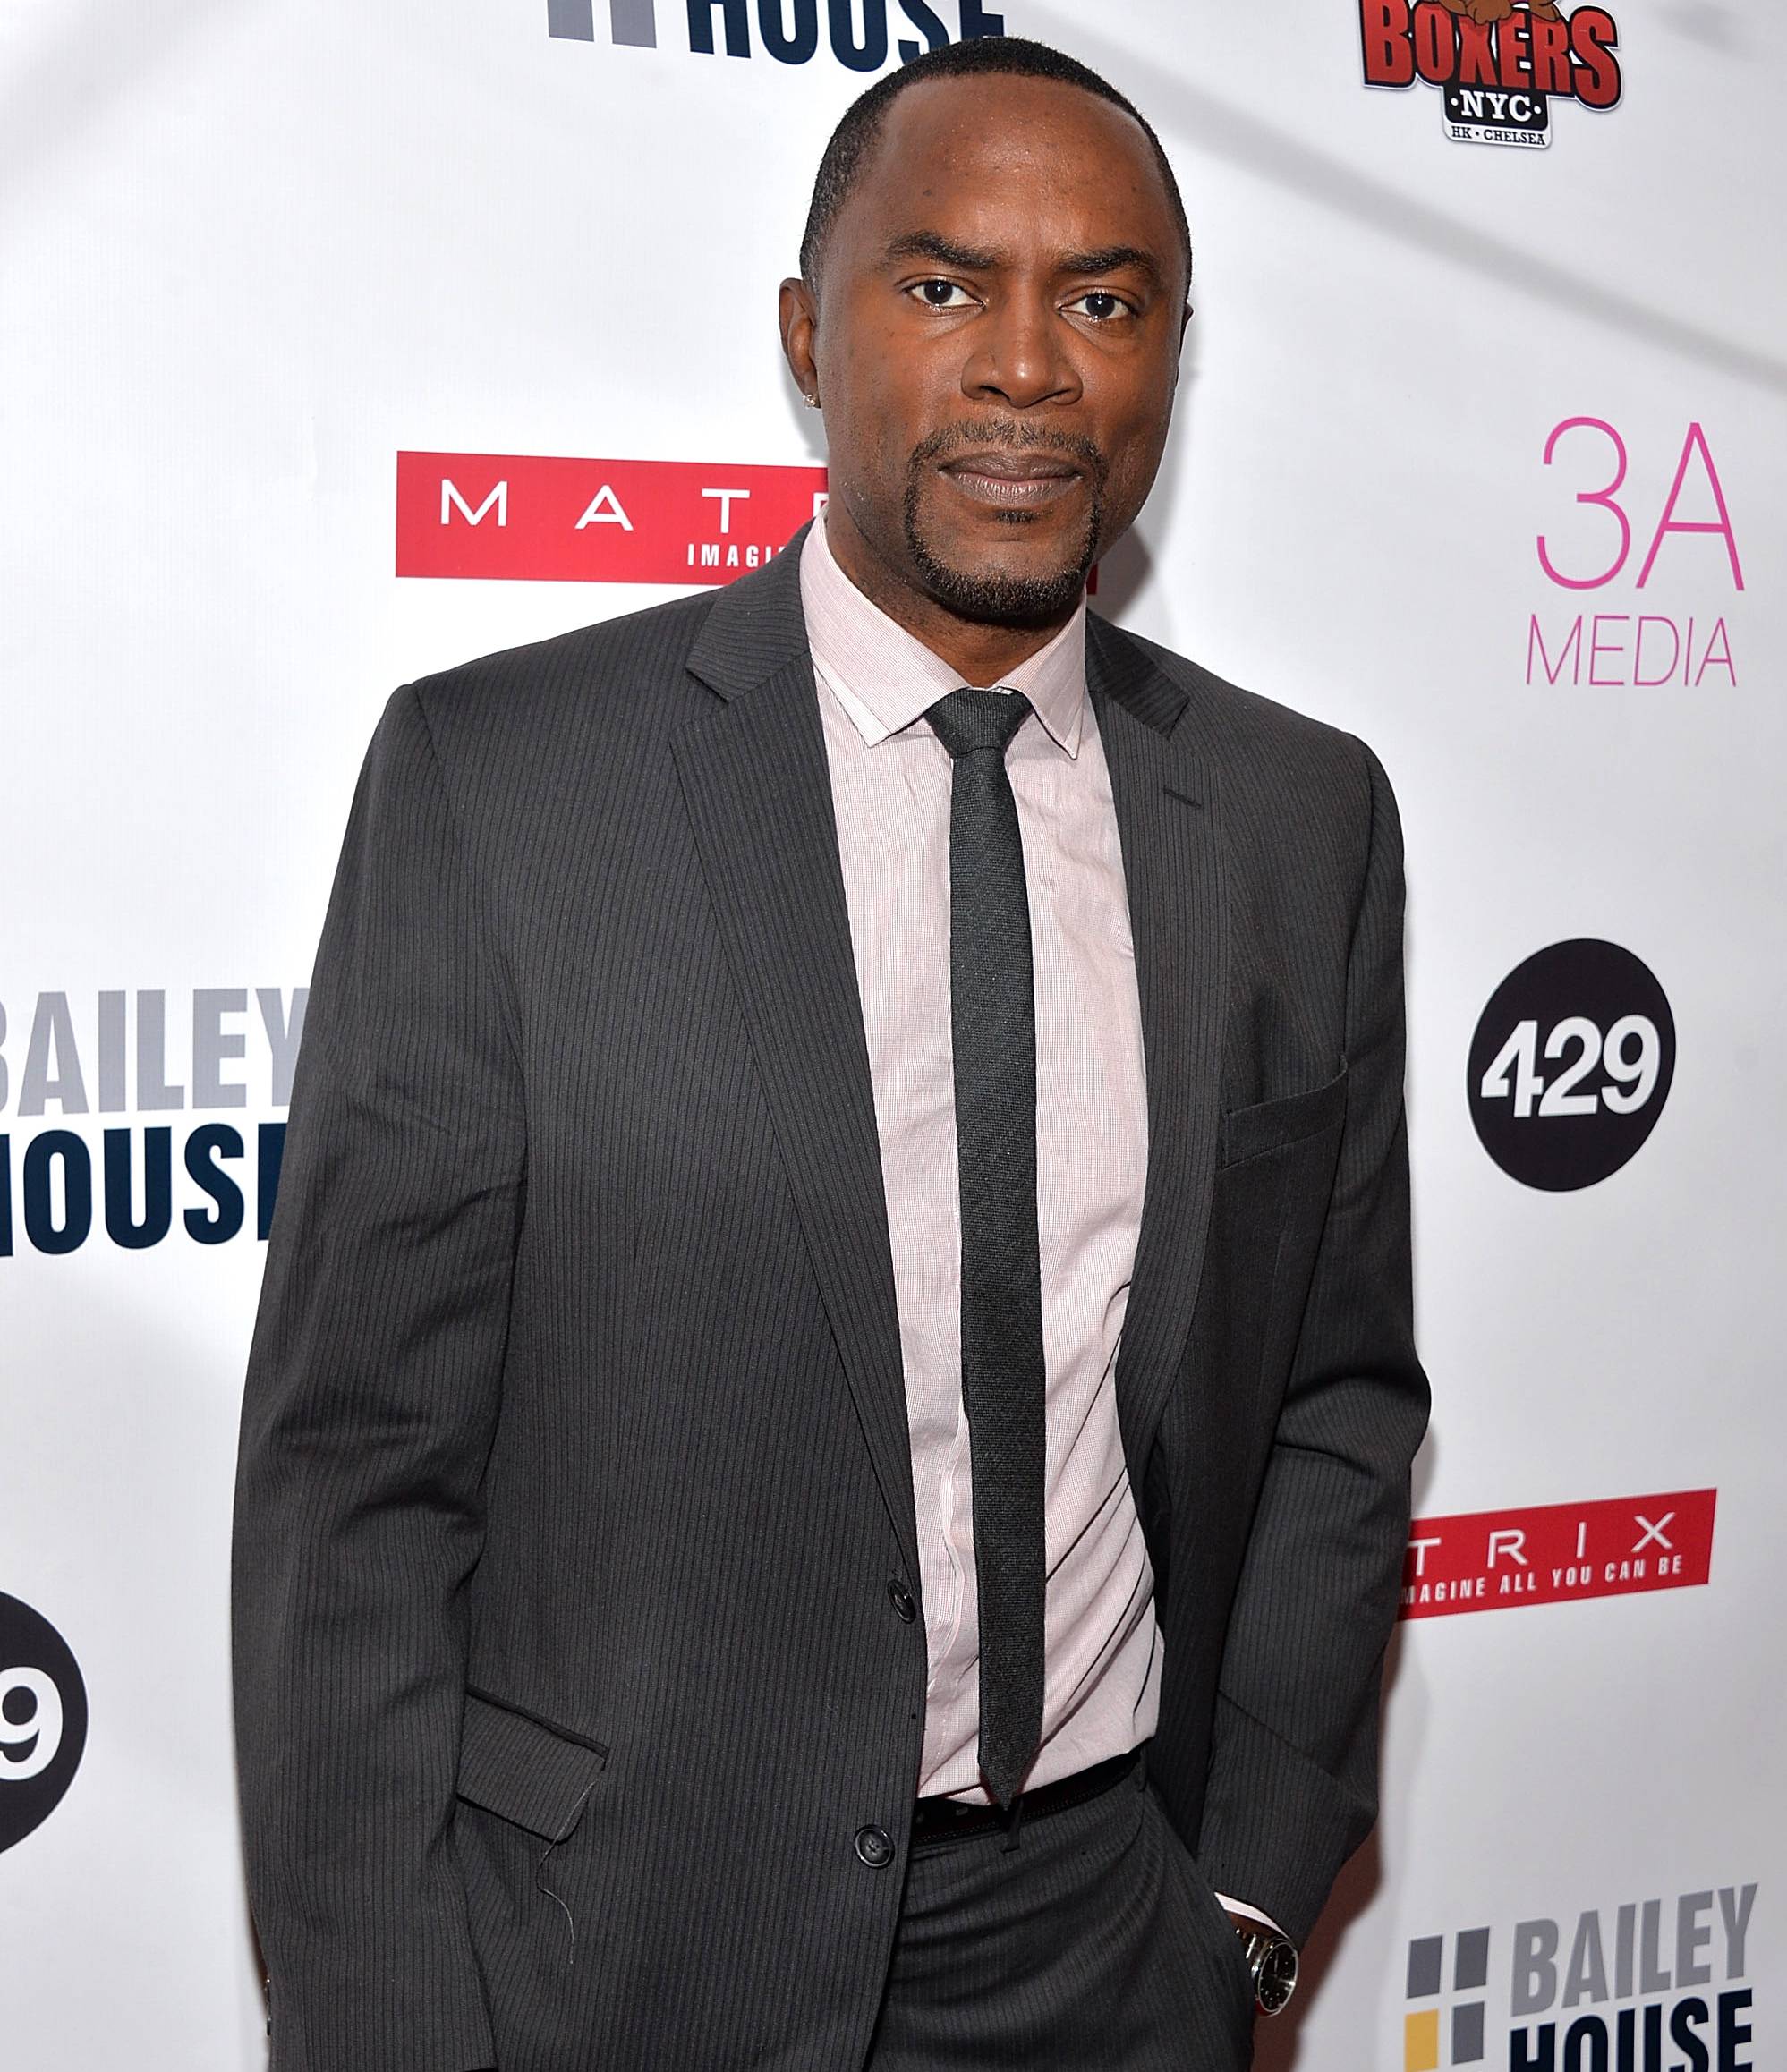 Being Richard Brooks - From the studio to television to the stage, Richard Brooks is an incredibly dynamic actor and singer who portrays Patrick Patterson on Being Mary Jane. Learn more about him now and be sure to tune in on January 7 at 10P/9C for an all new episode of Being Mary Jane!(Photo: Andrew H. Walker/Getty Images)